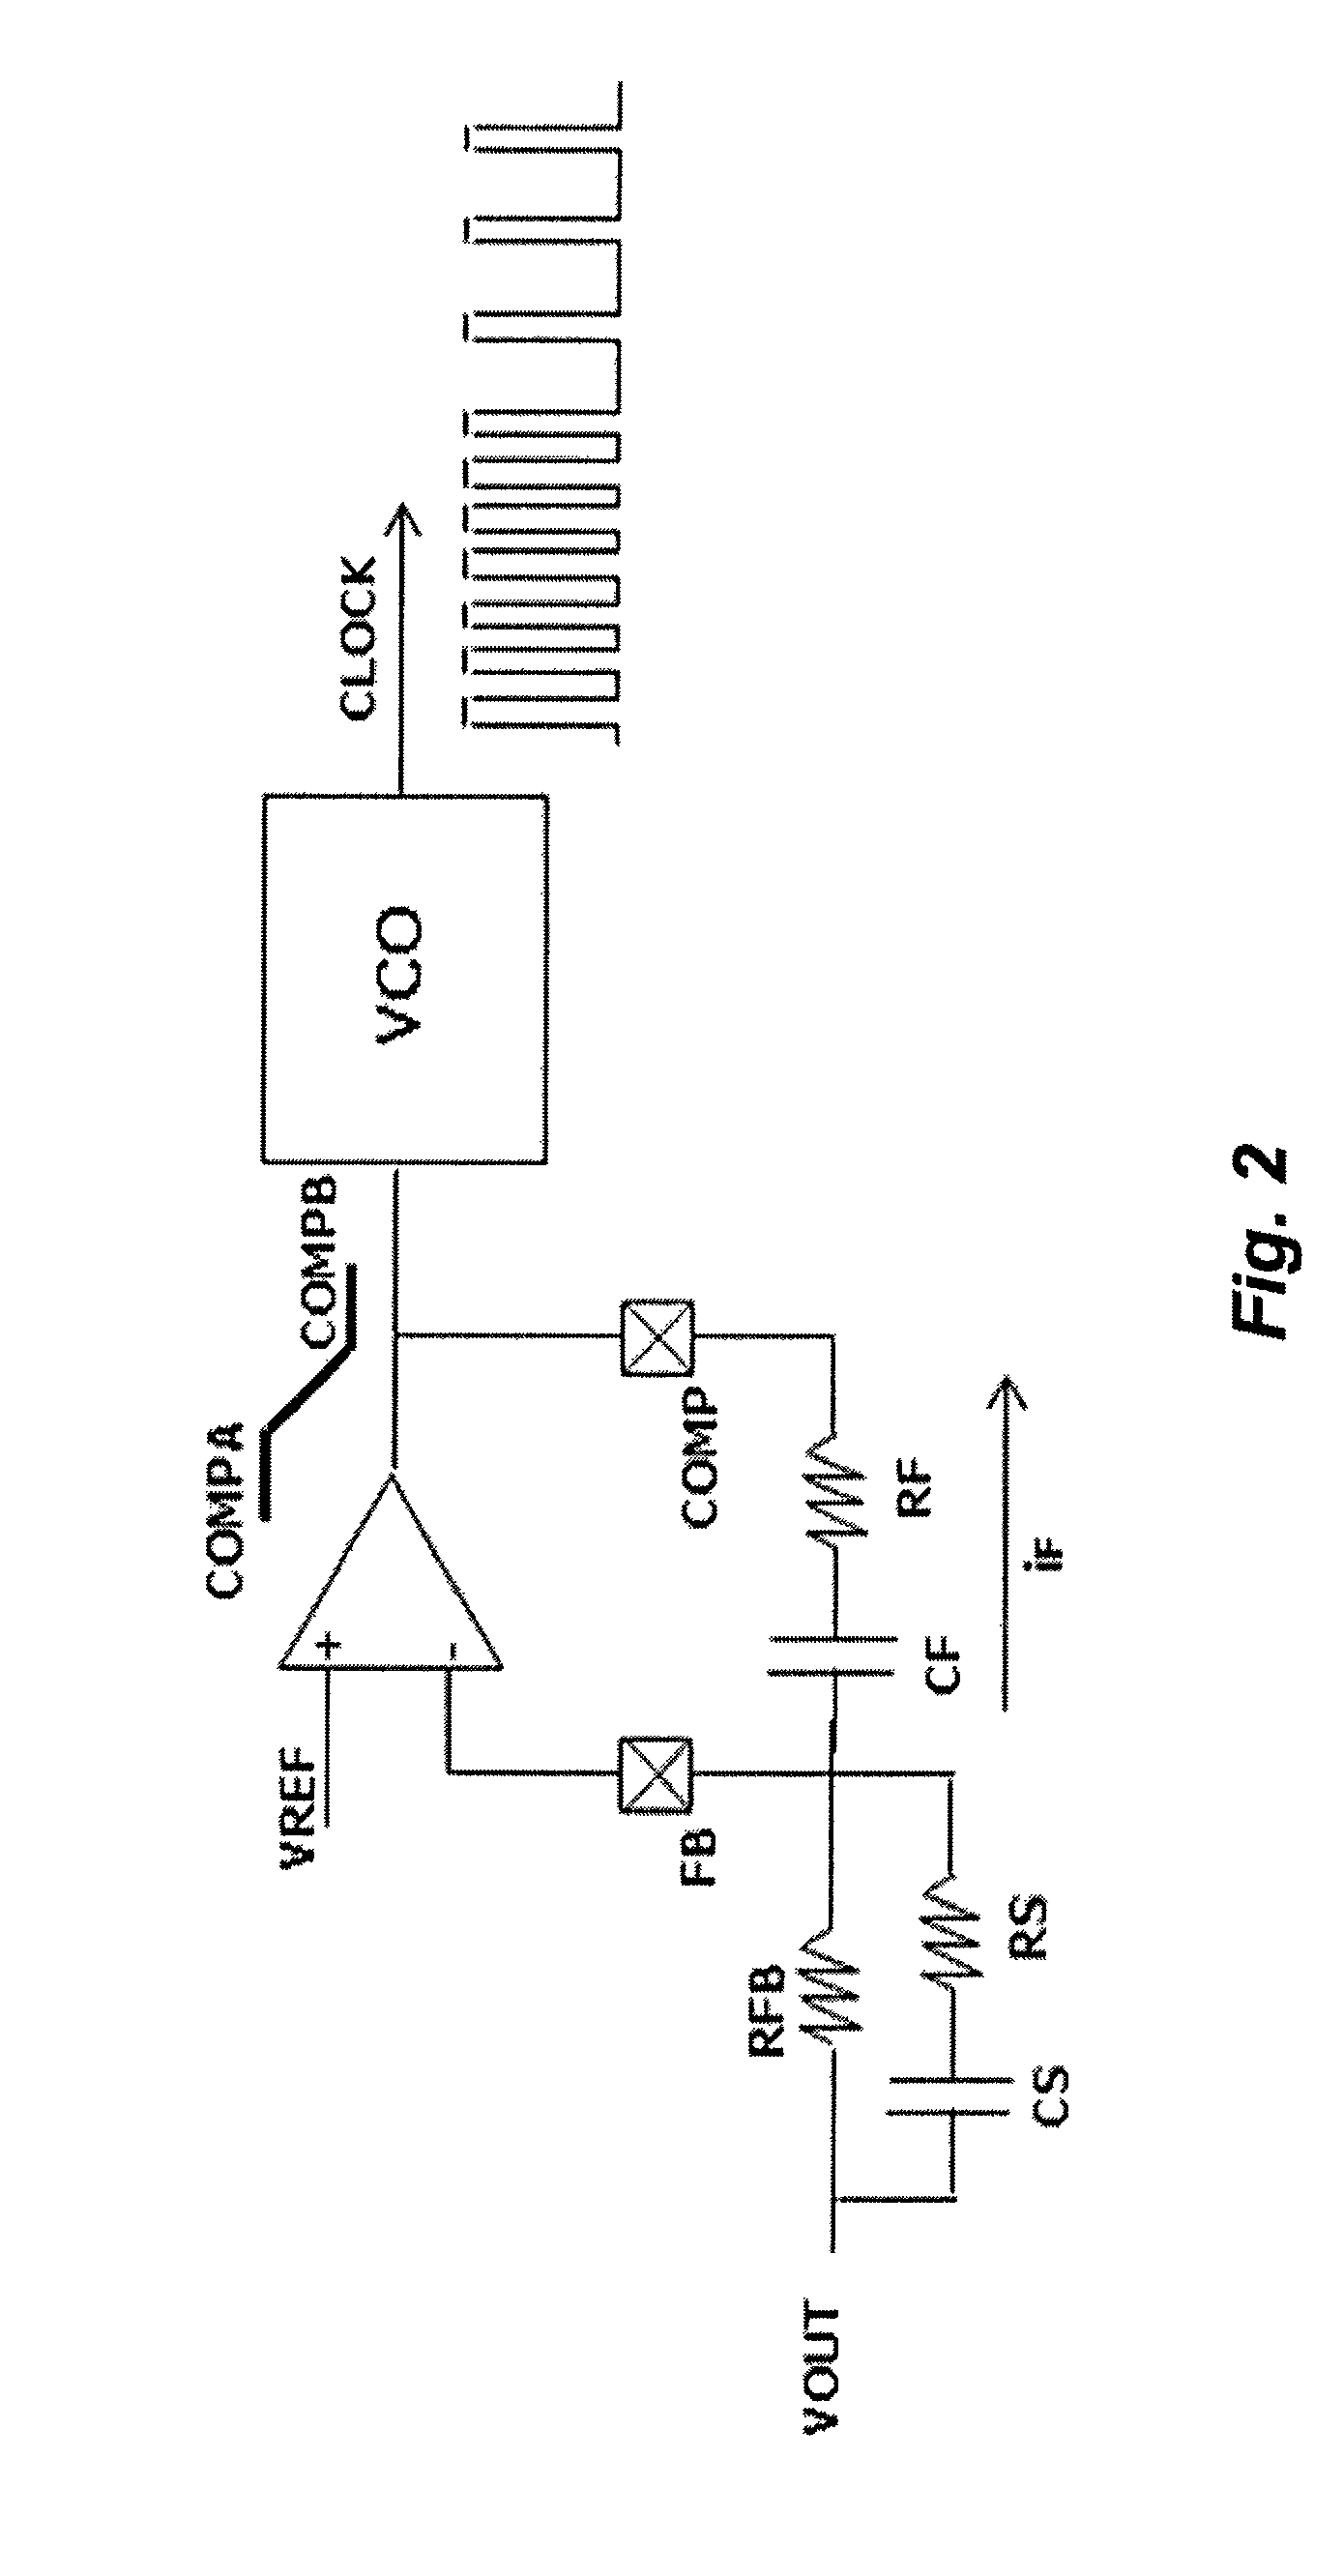 Constant-on-time multi-phase switching voltage regulator and related method of generating a regulated voltage